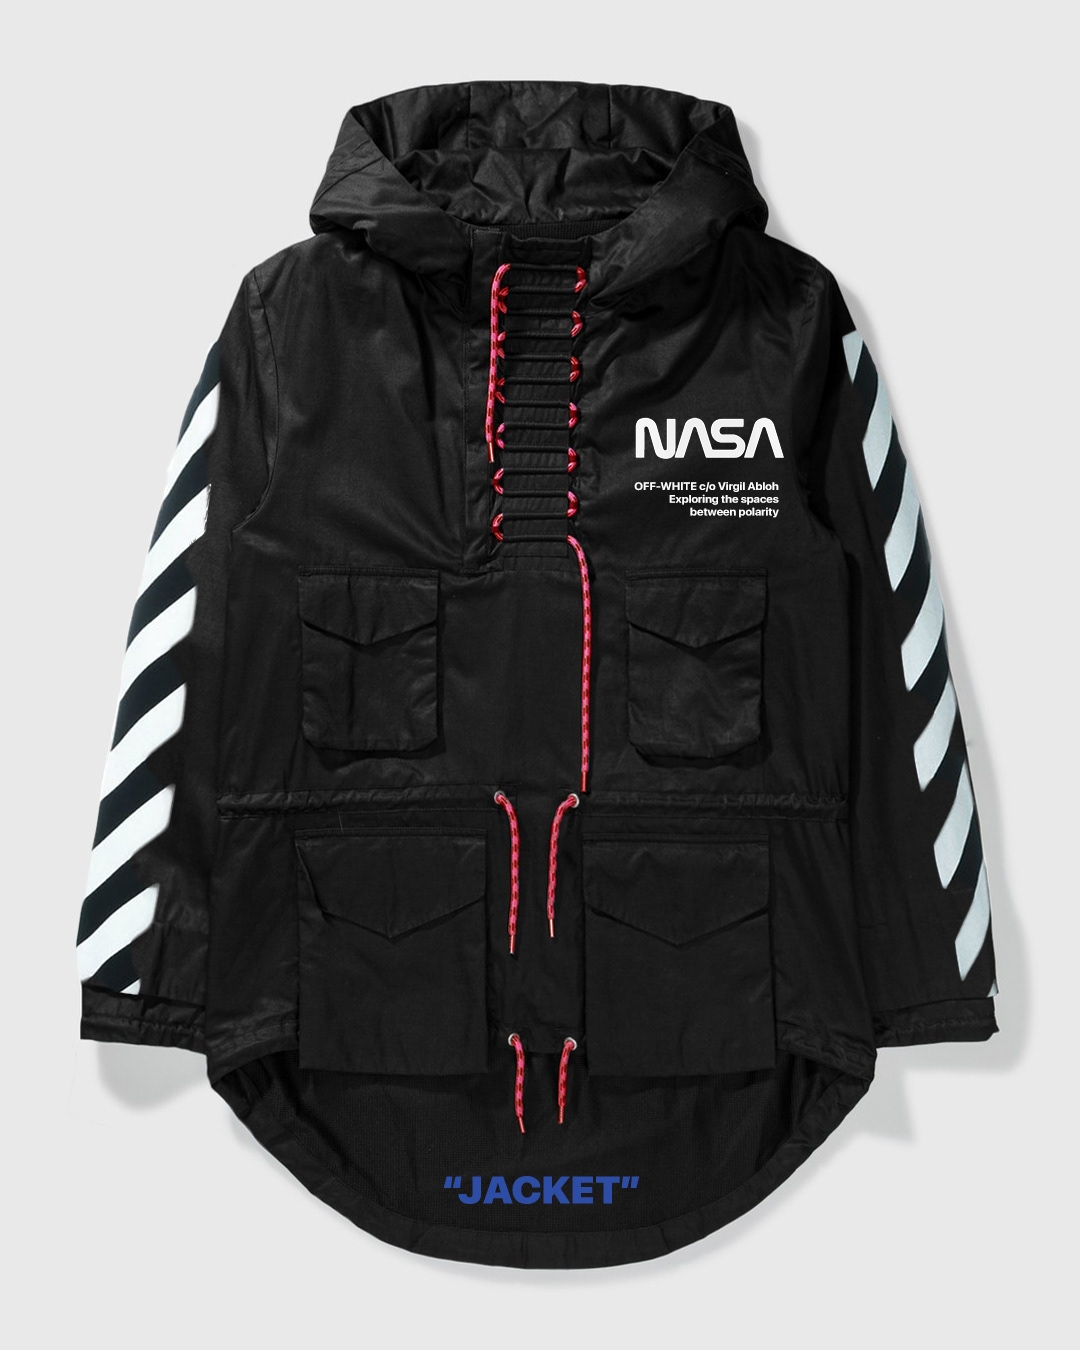 piano Want to Exactly Product Concept from a Off-White x NASA Collaboration on Behance